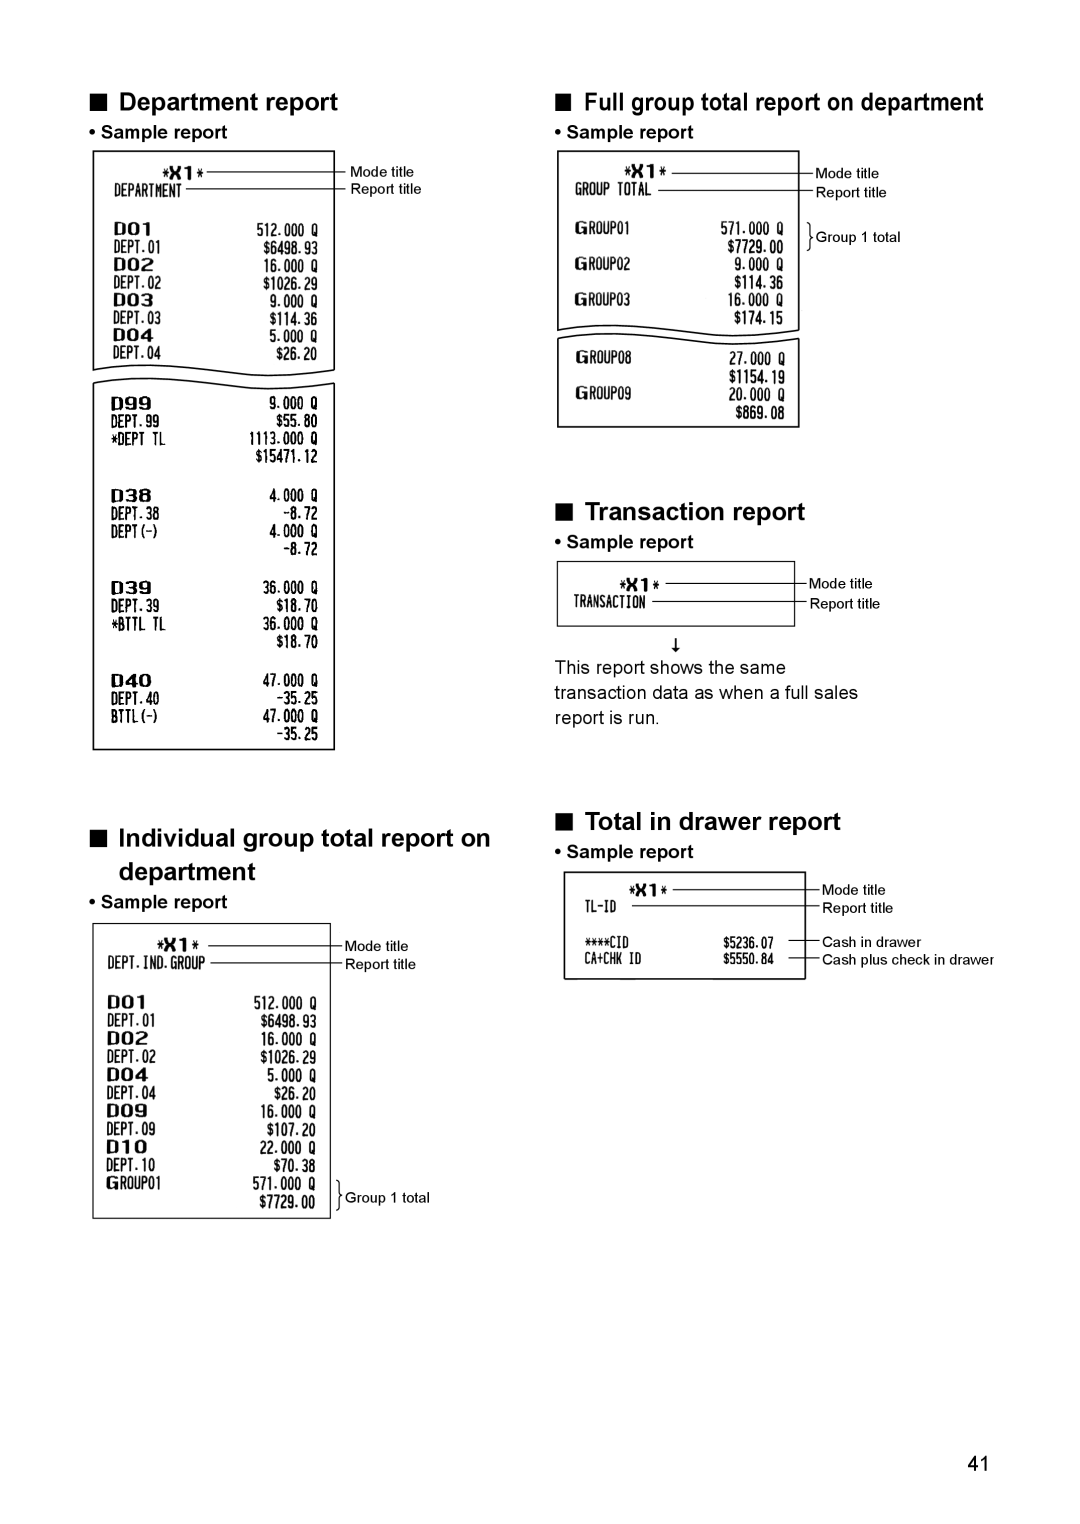 Sharp ER-A347 Department report, Full group total report on department, Transaction report, Total in drawer report 